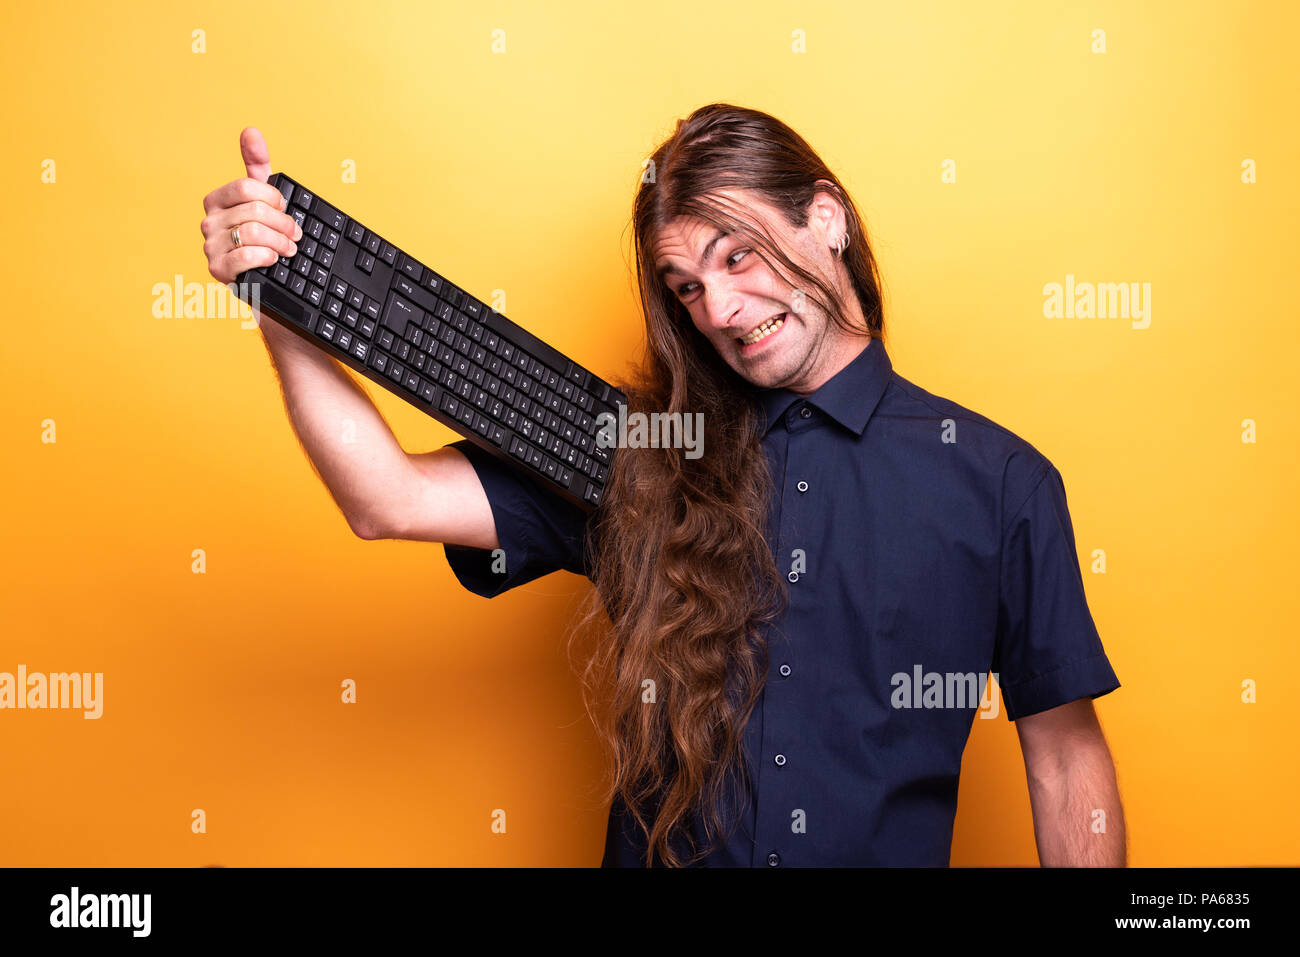 Inspiring male adult holding a keyboard Stock Photo